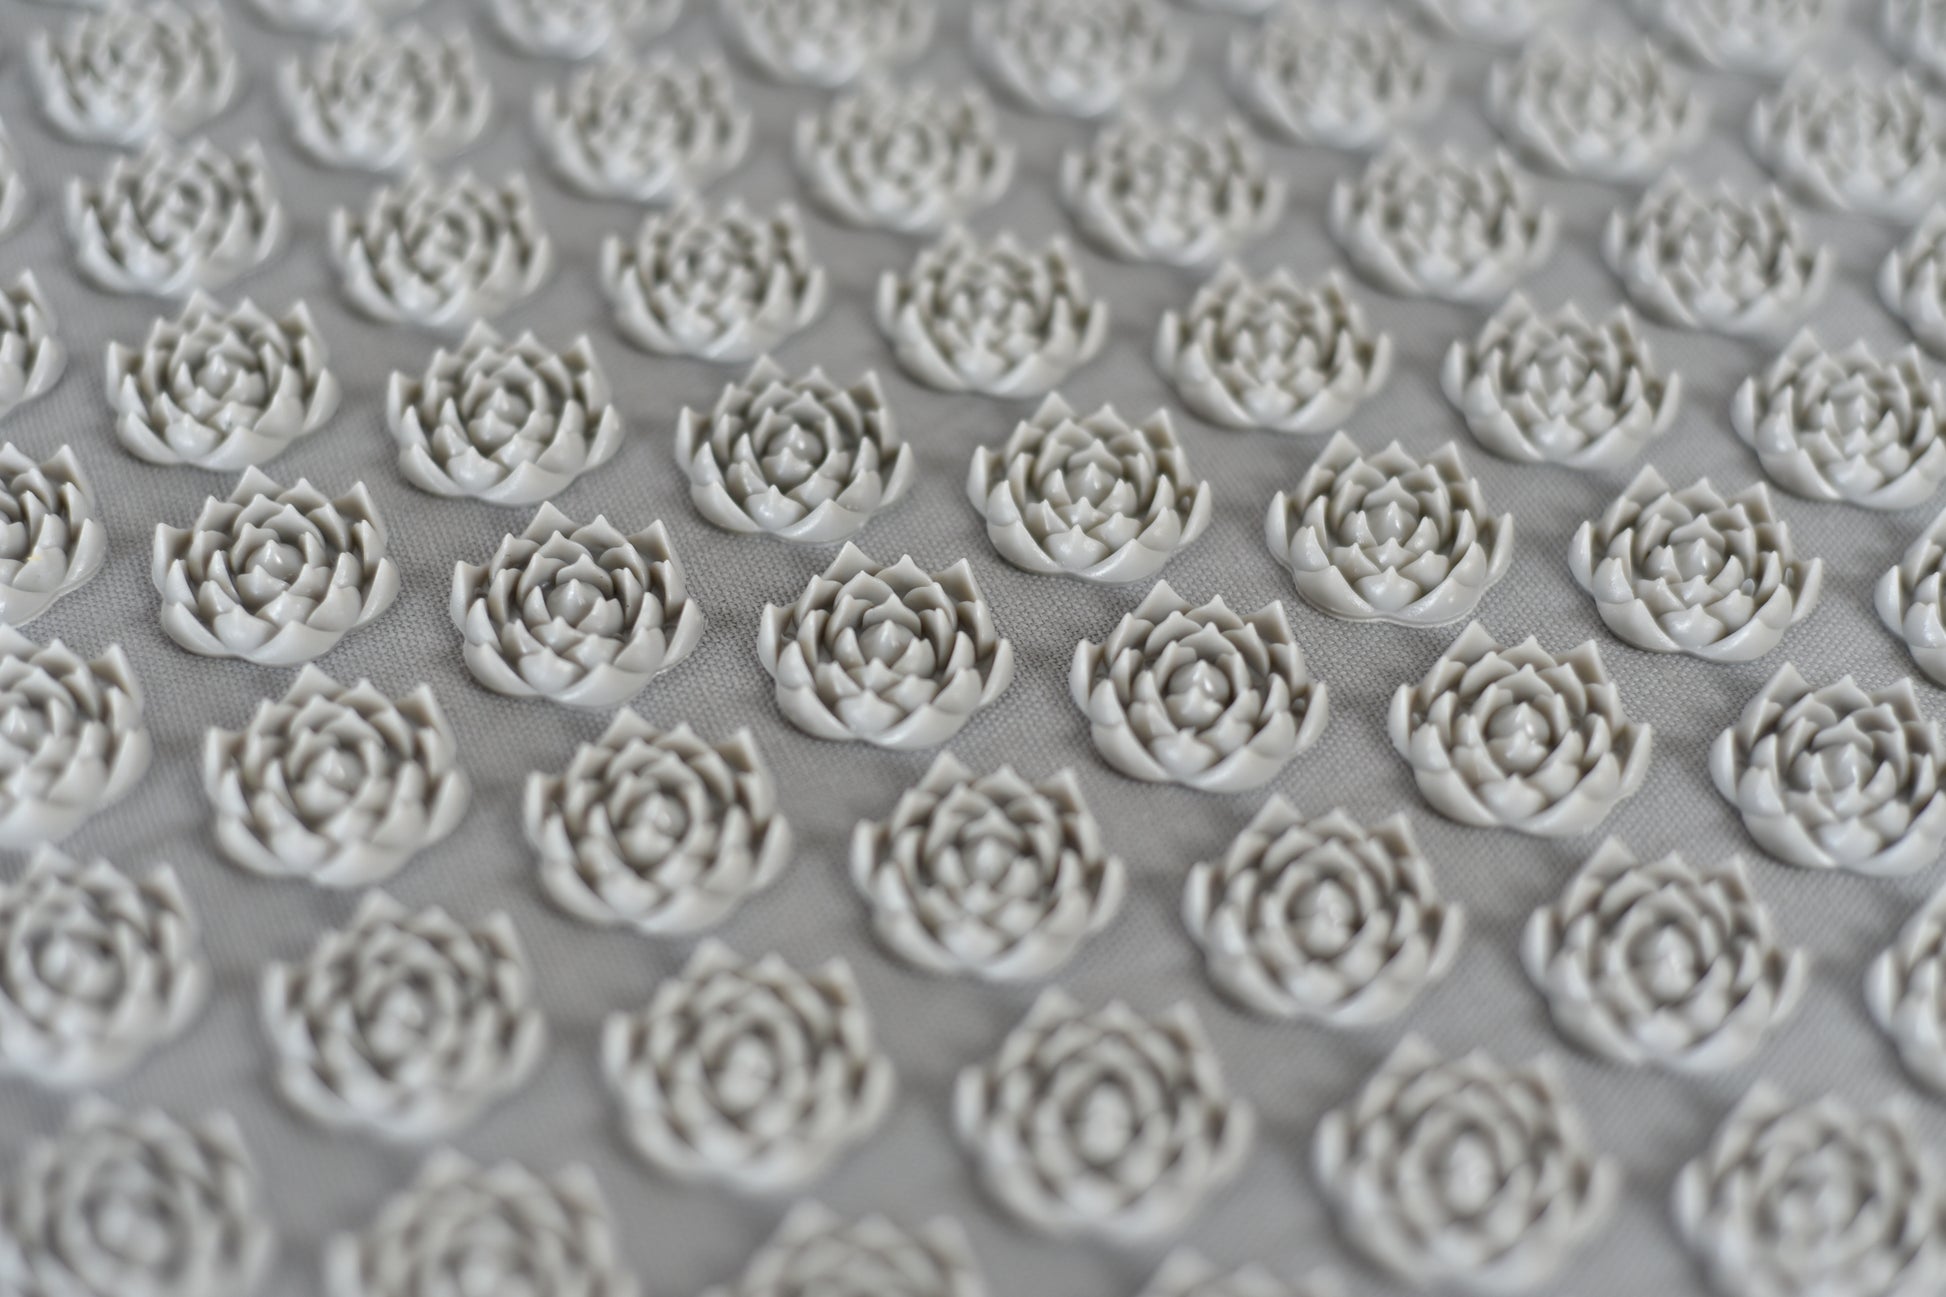 Thousands of sharp spikes apply pressure to skin and muscles supporting restful sleep, relaxation, mental clarity and well-being. meditation mat. shop eco-friendly stylish sustainable home goods. women-owned brands. ethically-made with biodegradable materials